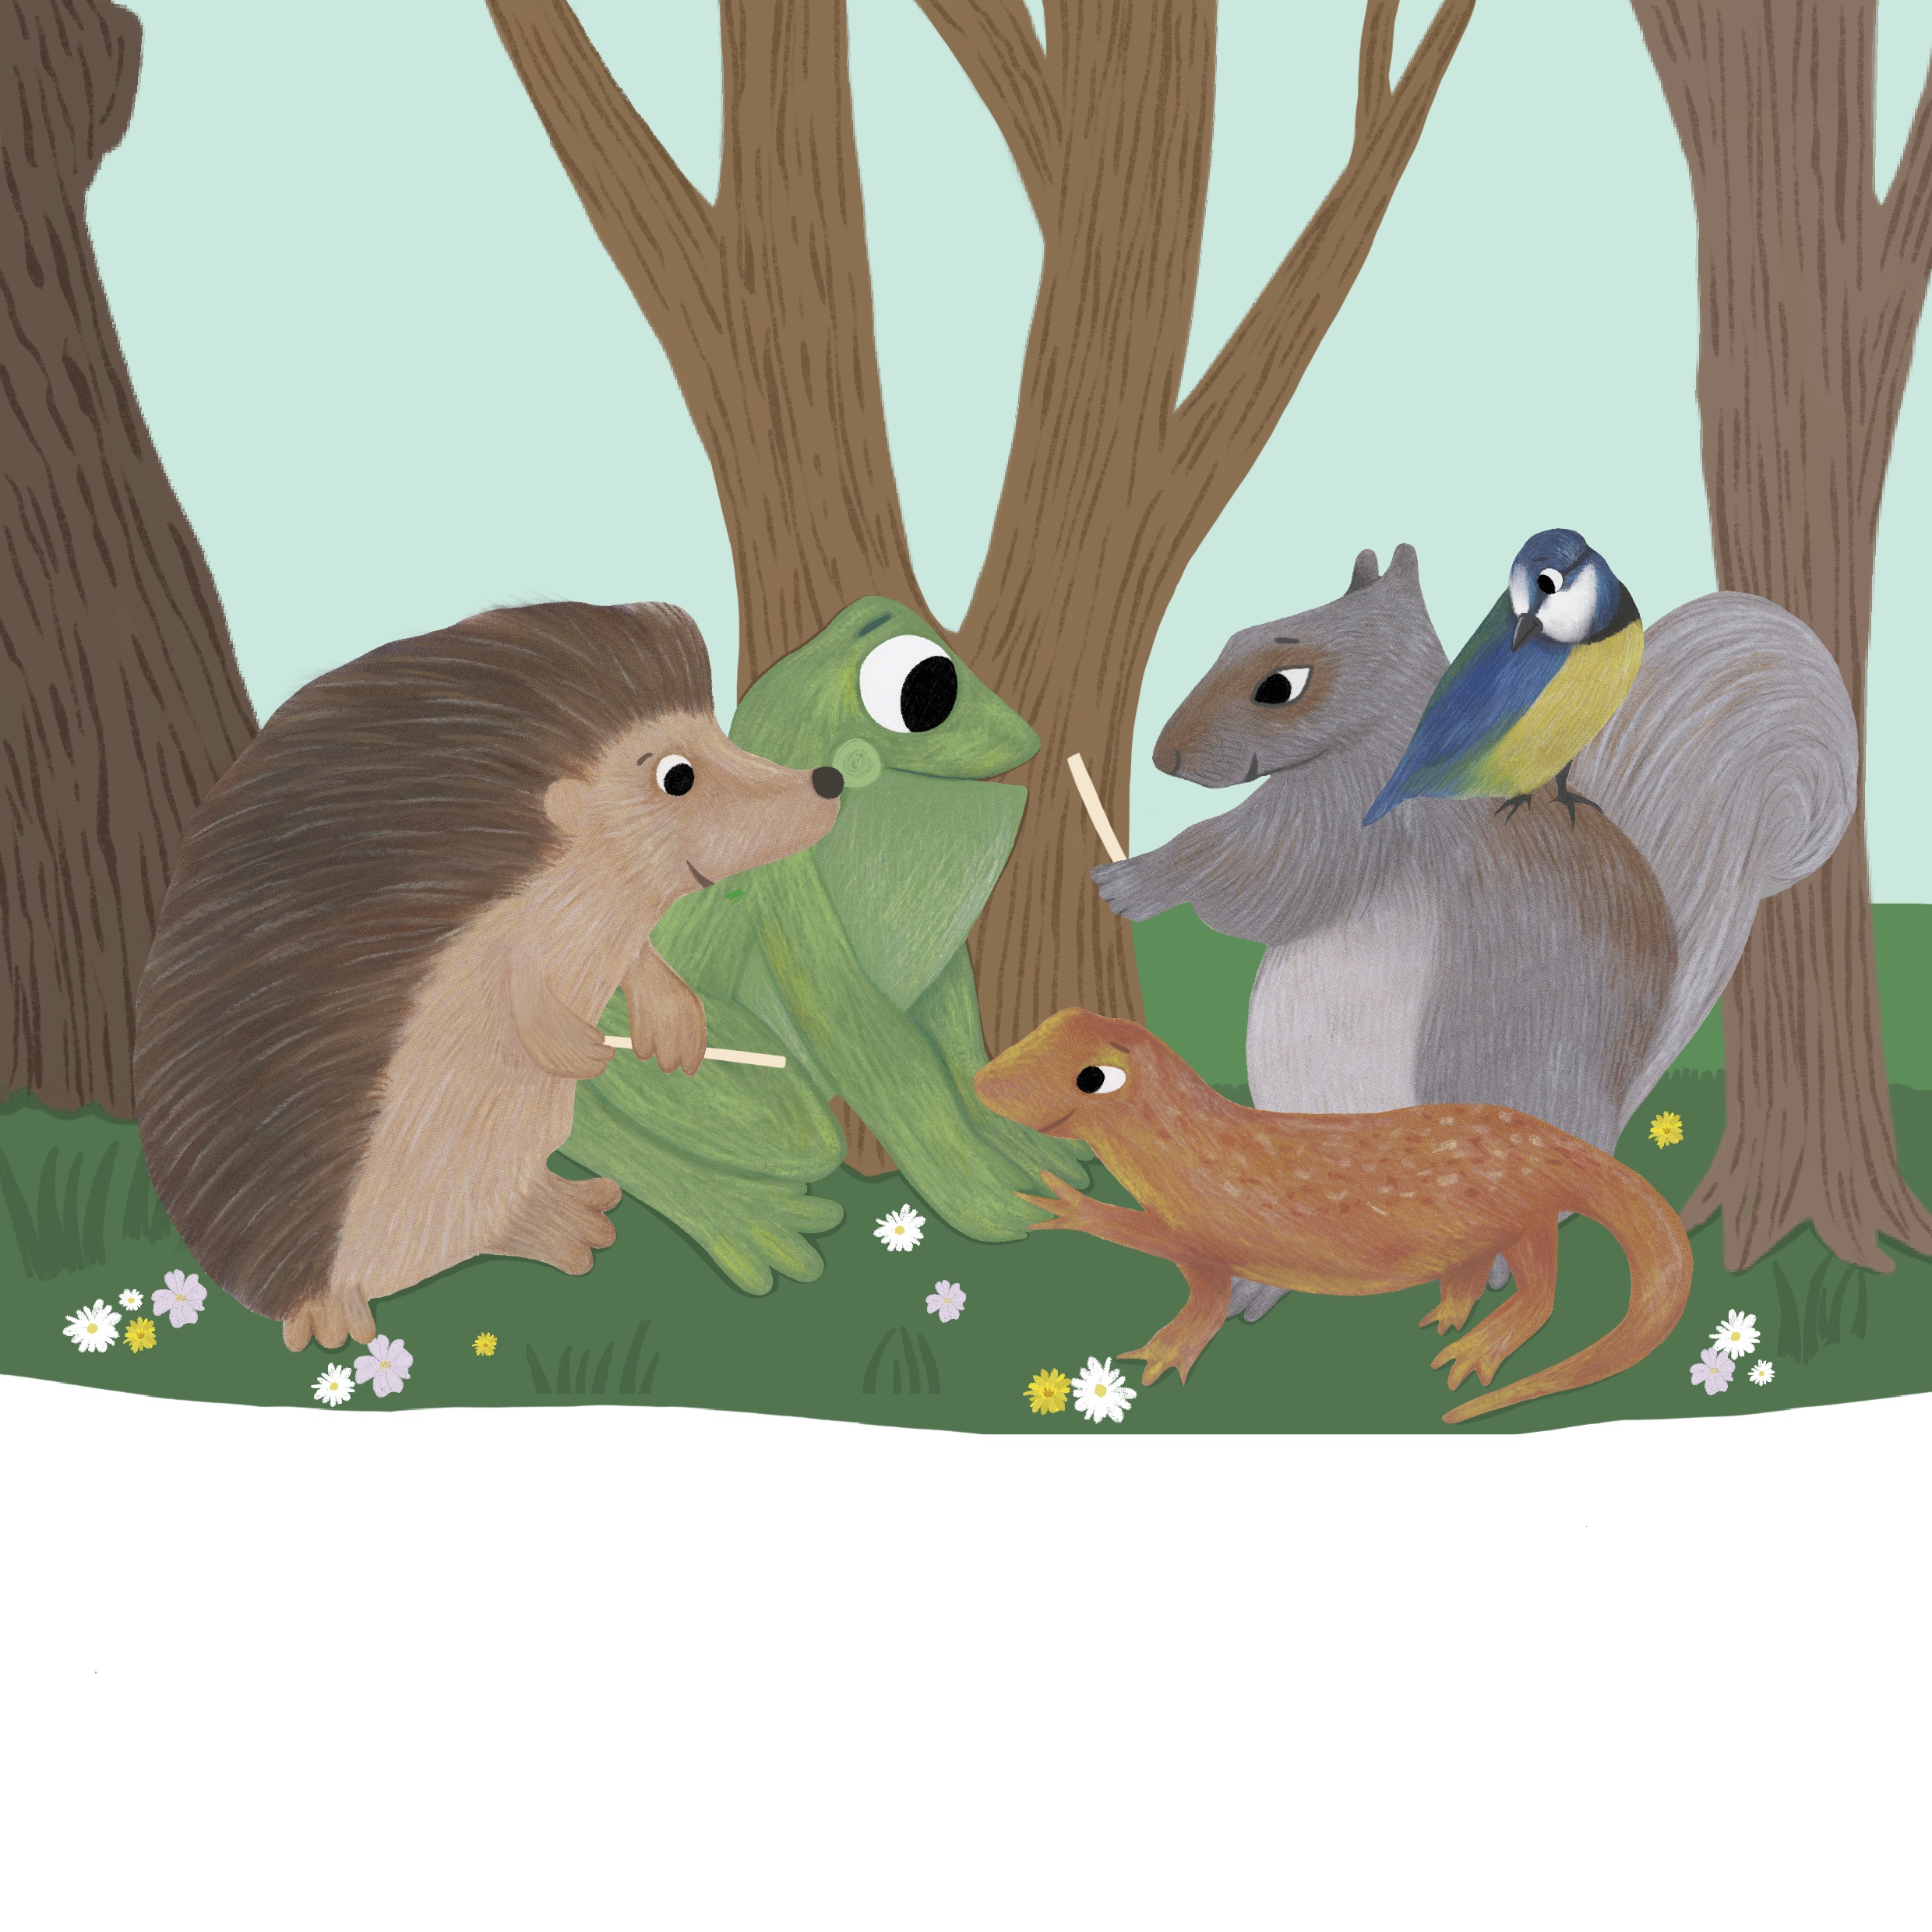 Frog & Hedgehog sending out tree warming invitations to their friends Newt, Squirrel & Bluetit